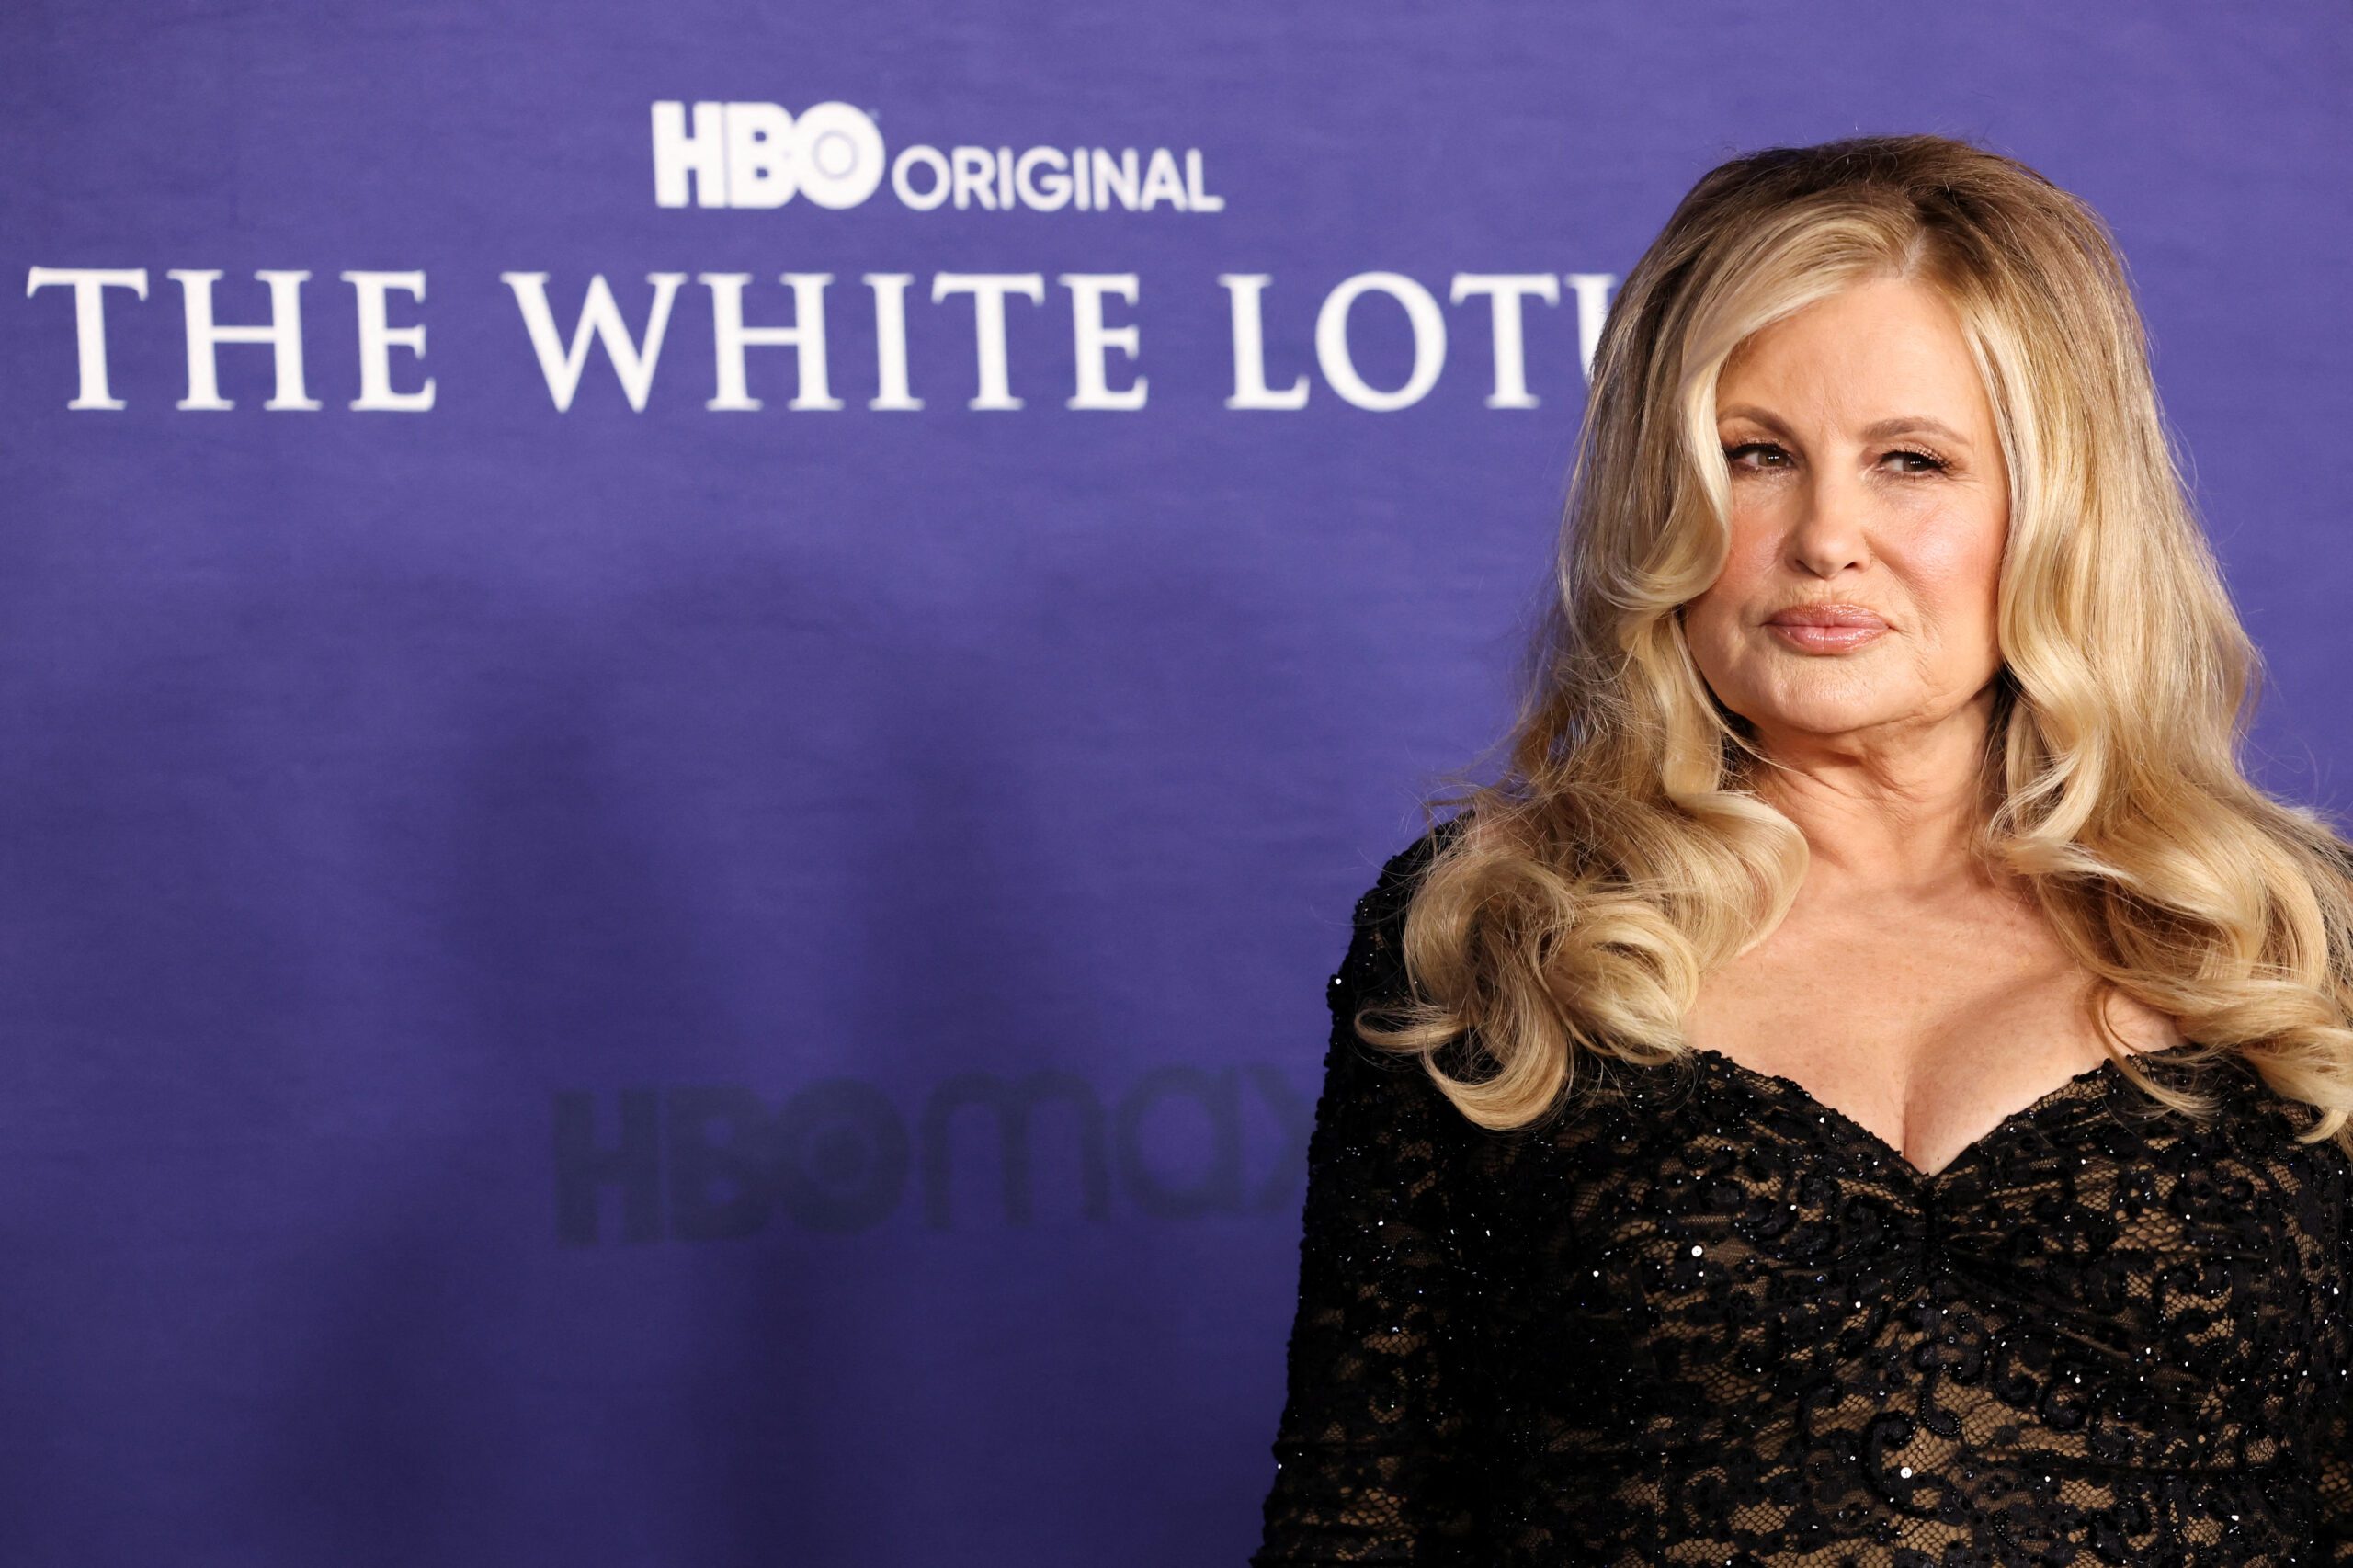 Jennifer Coolidge wants to show fans a different realm in ‘The White Lotus’ season 2